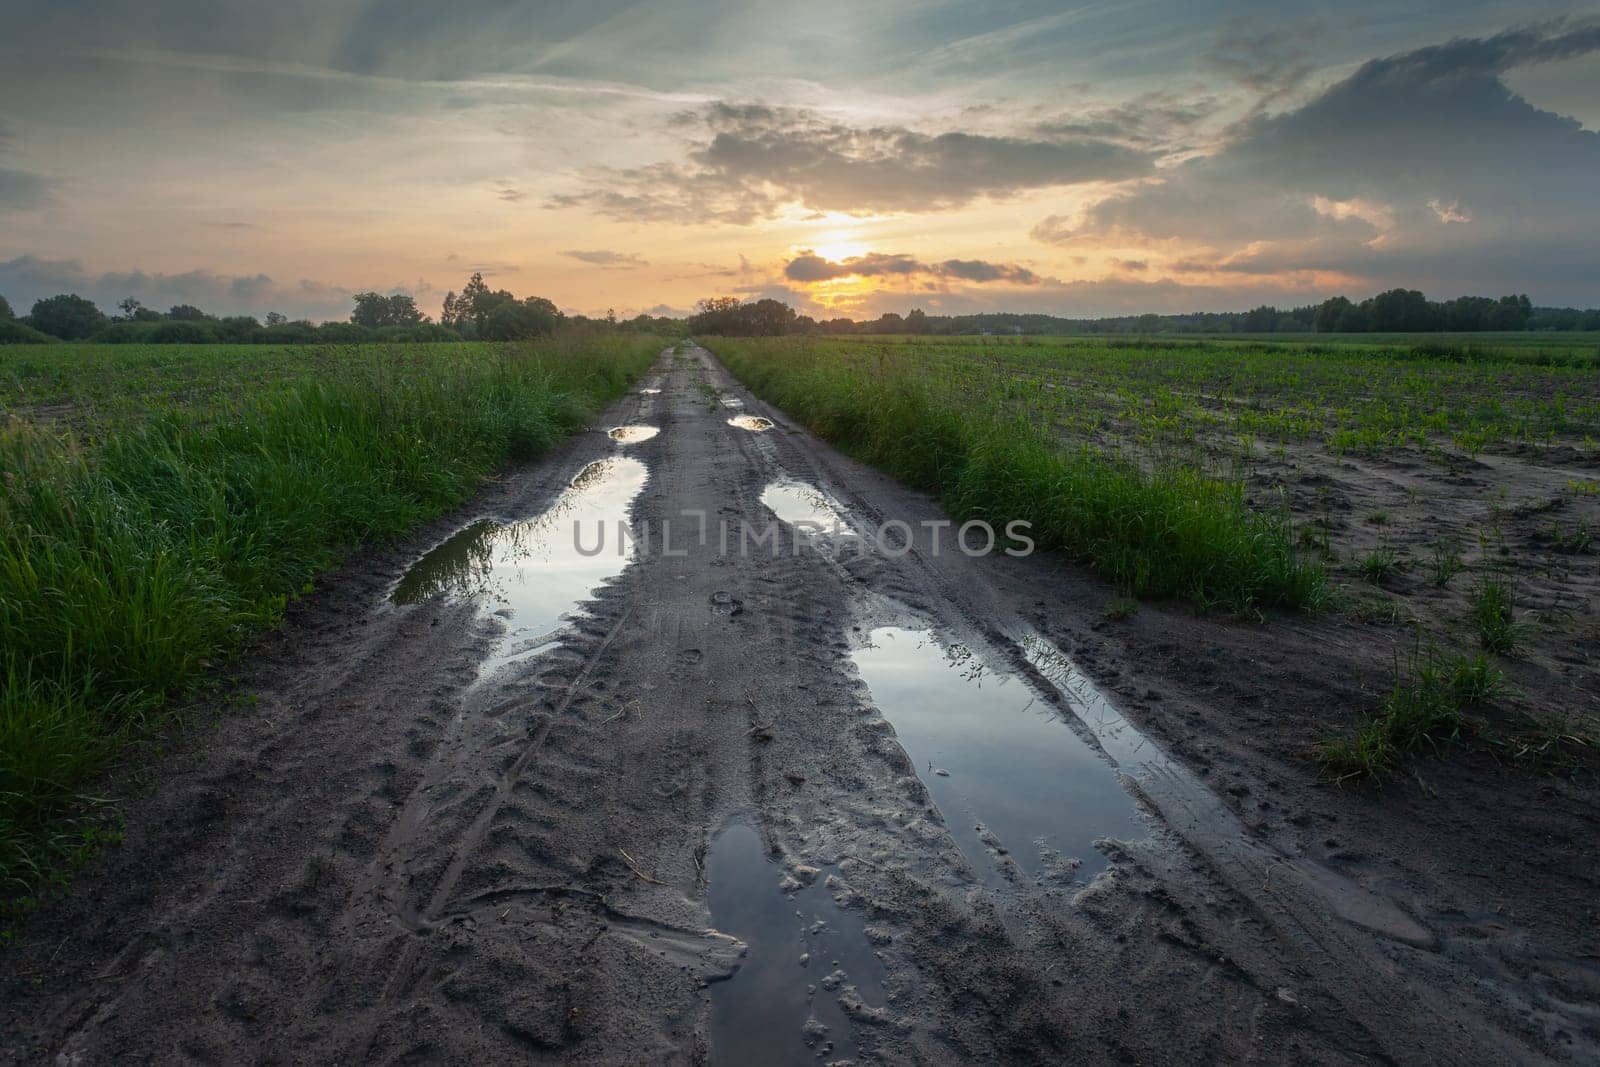 Wet dirt road with puddles between farmland and cloudy sunset by darekb22